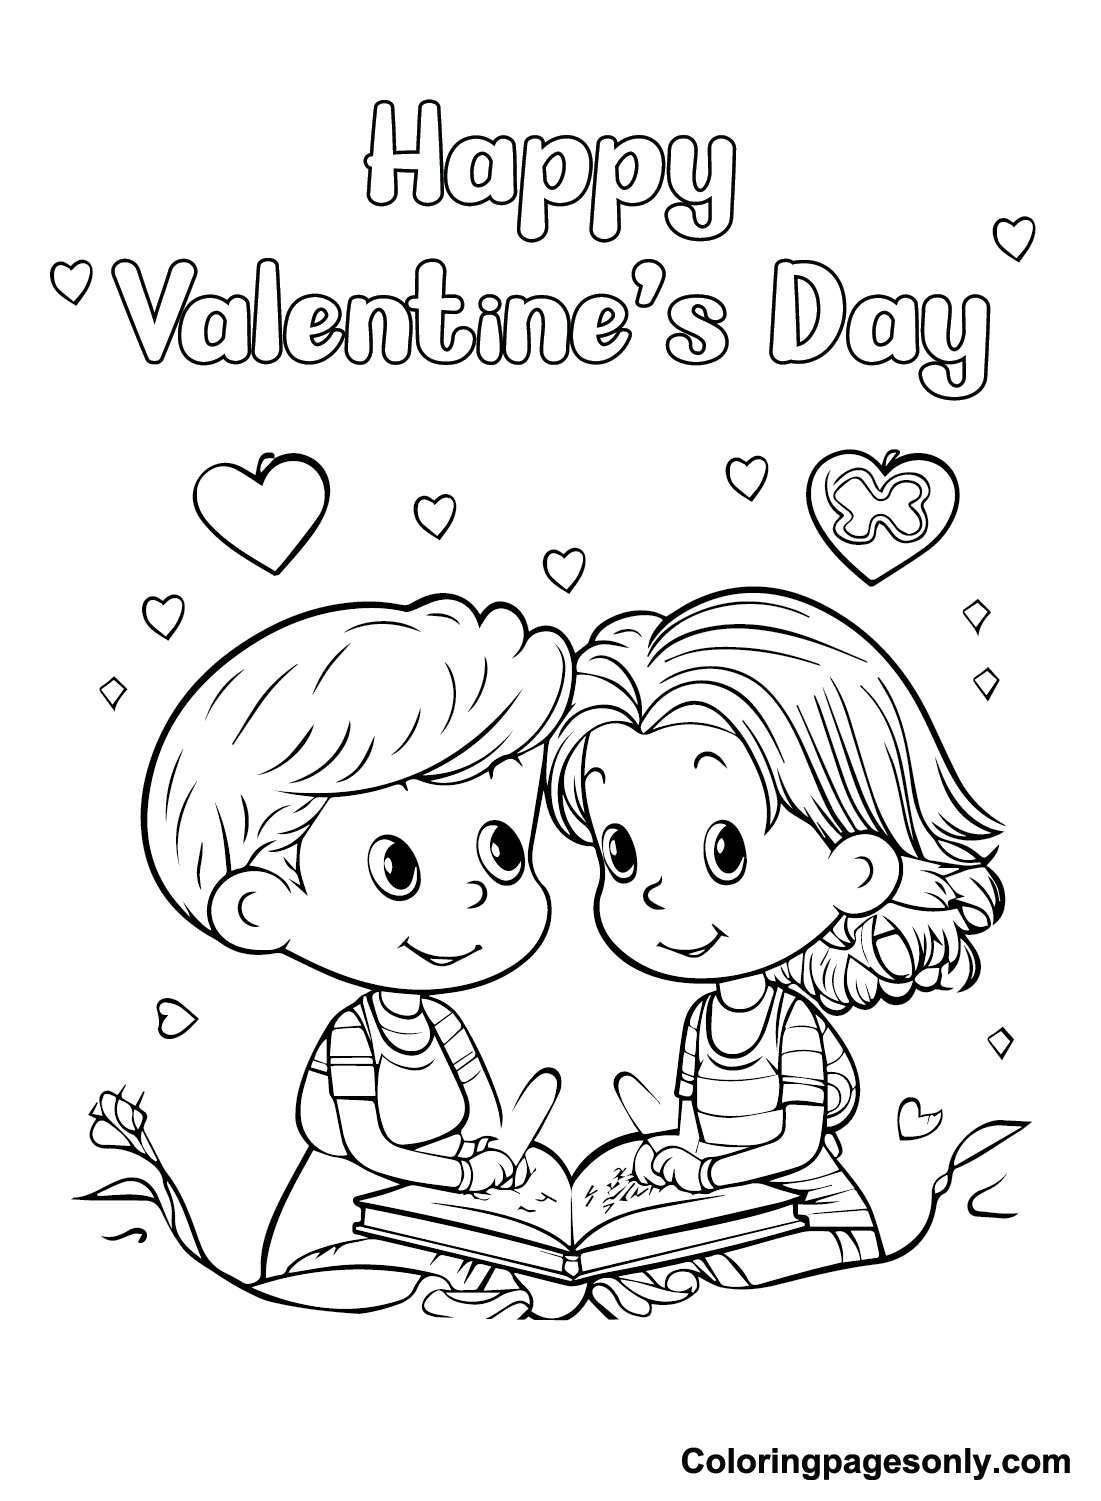 Happy Valentines Day Cards Coloring Page